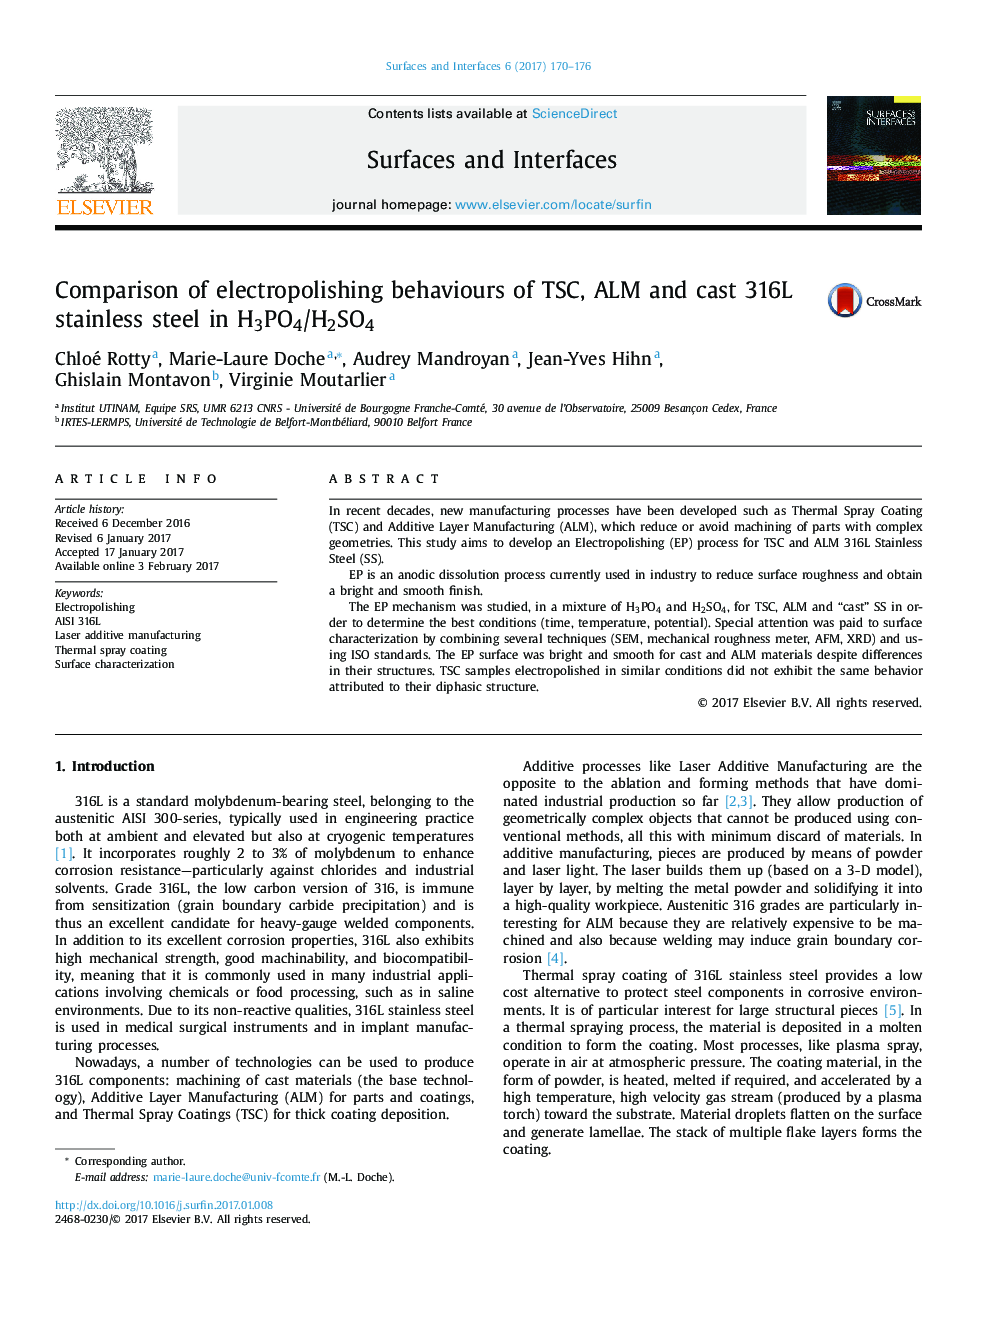 Comparison of electropolishing behaviours of TSC, ALM and cast 316L stainless steel in H3PO4/H2SO4